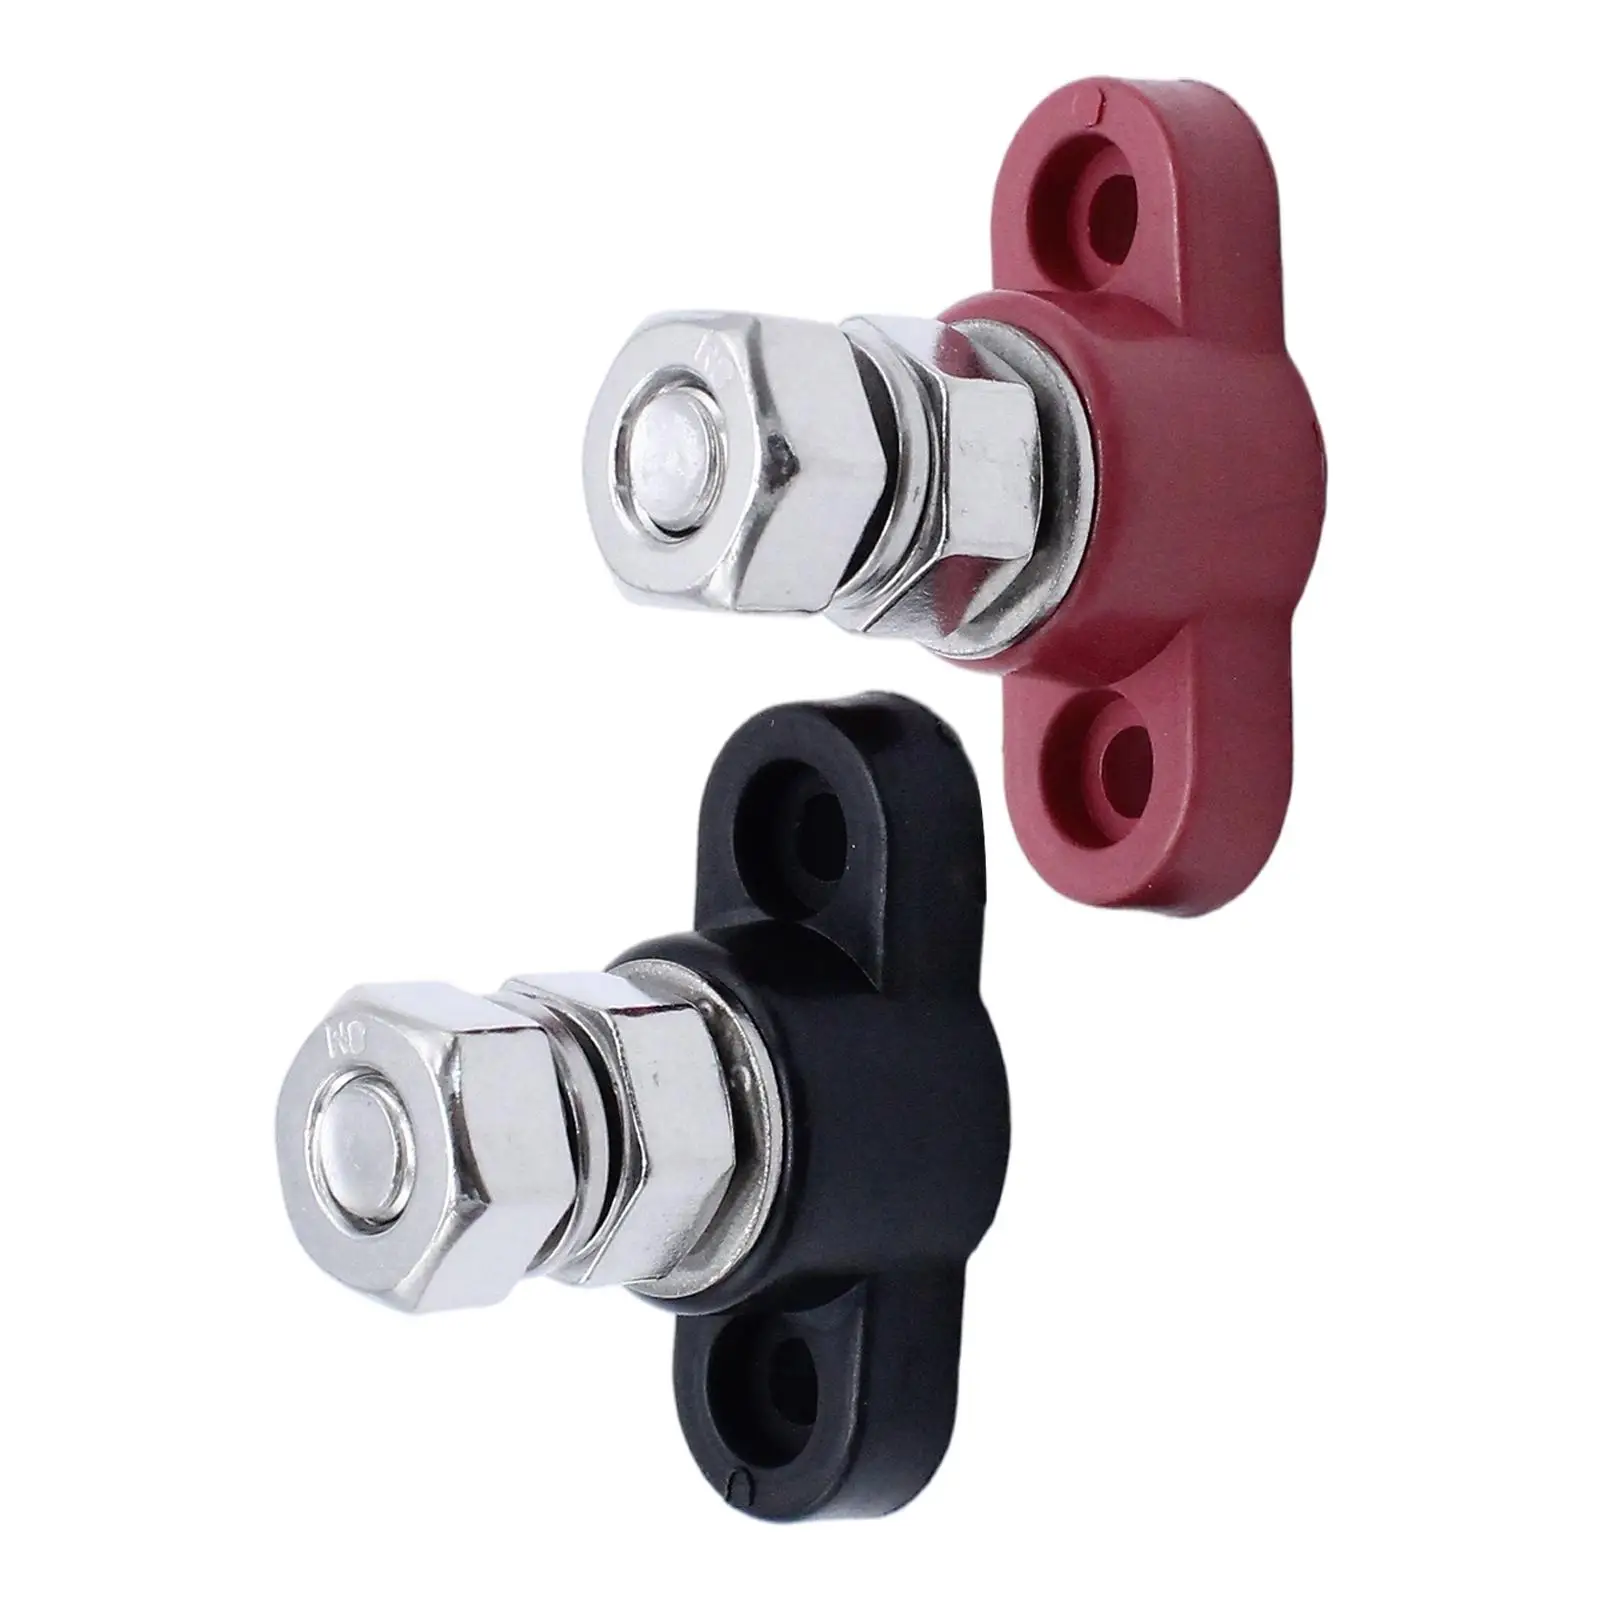 Power Junction Posts Stainless Steel Insulated Heavy-Duty Red Black Set Electrical Parts Terminal Stud Terminal Block